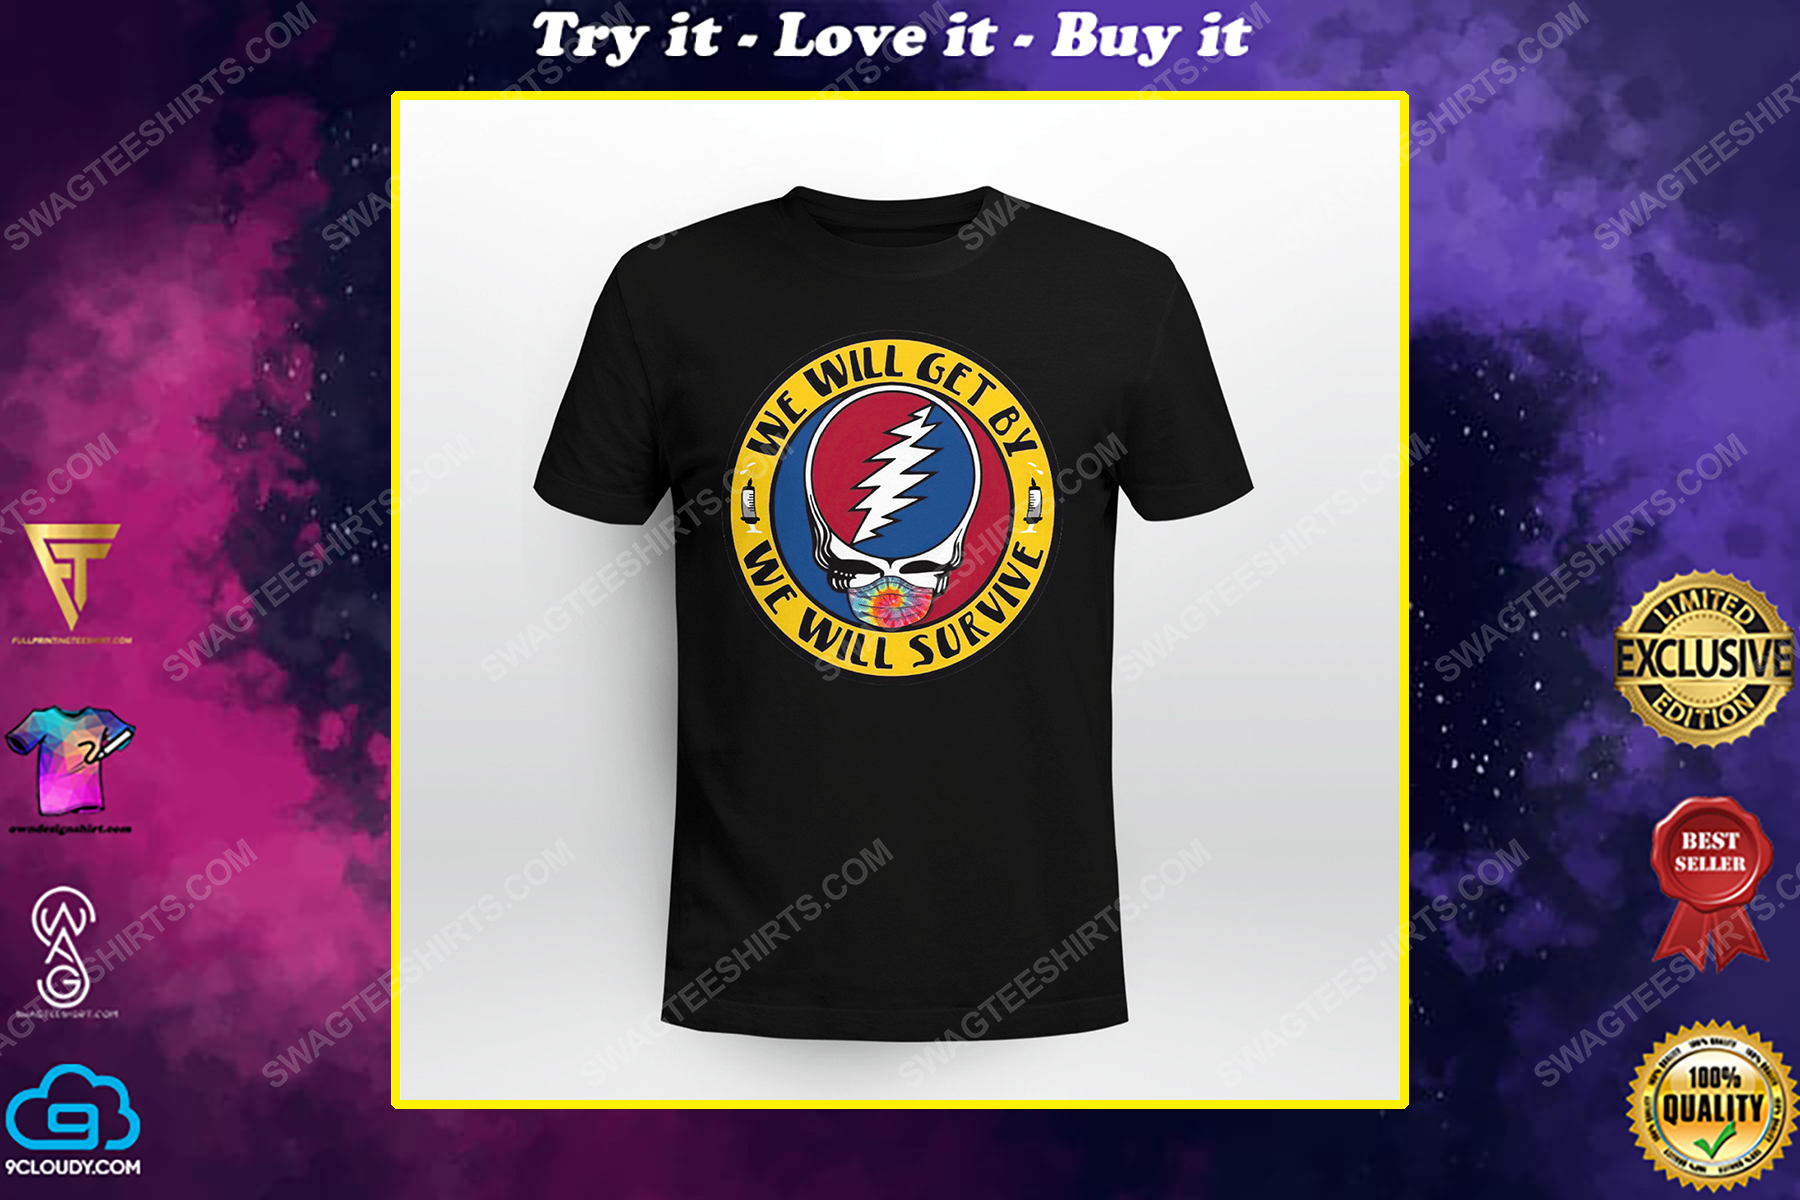 We will get by we will survive grateful dead shirt